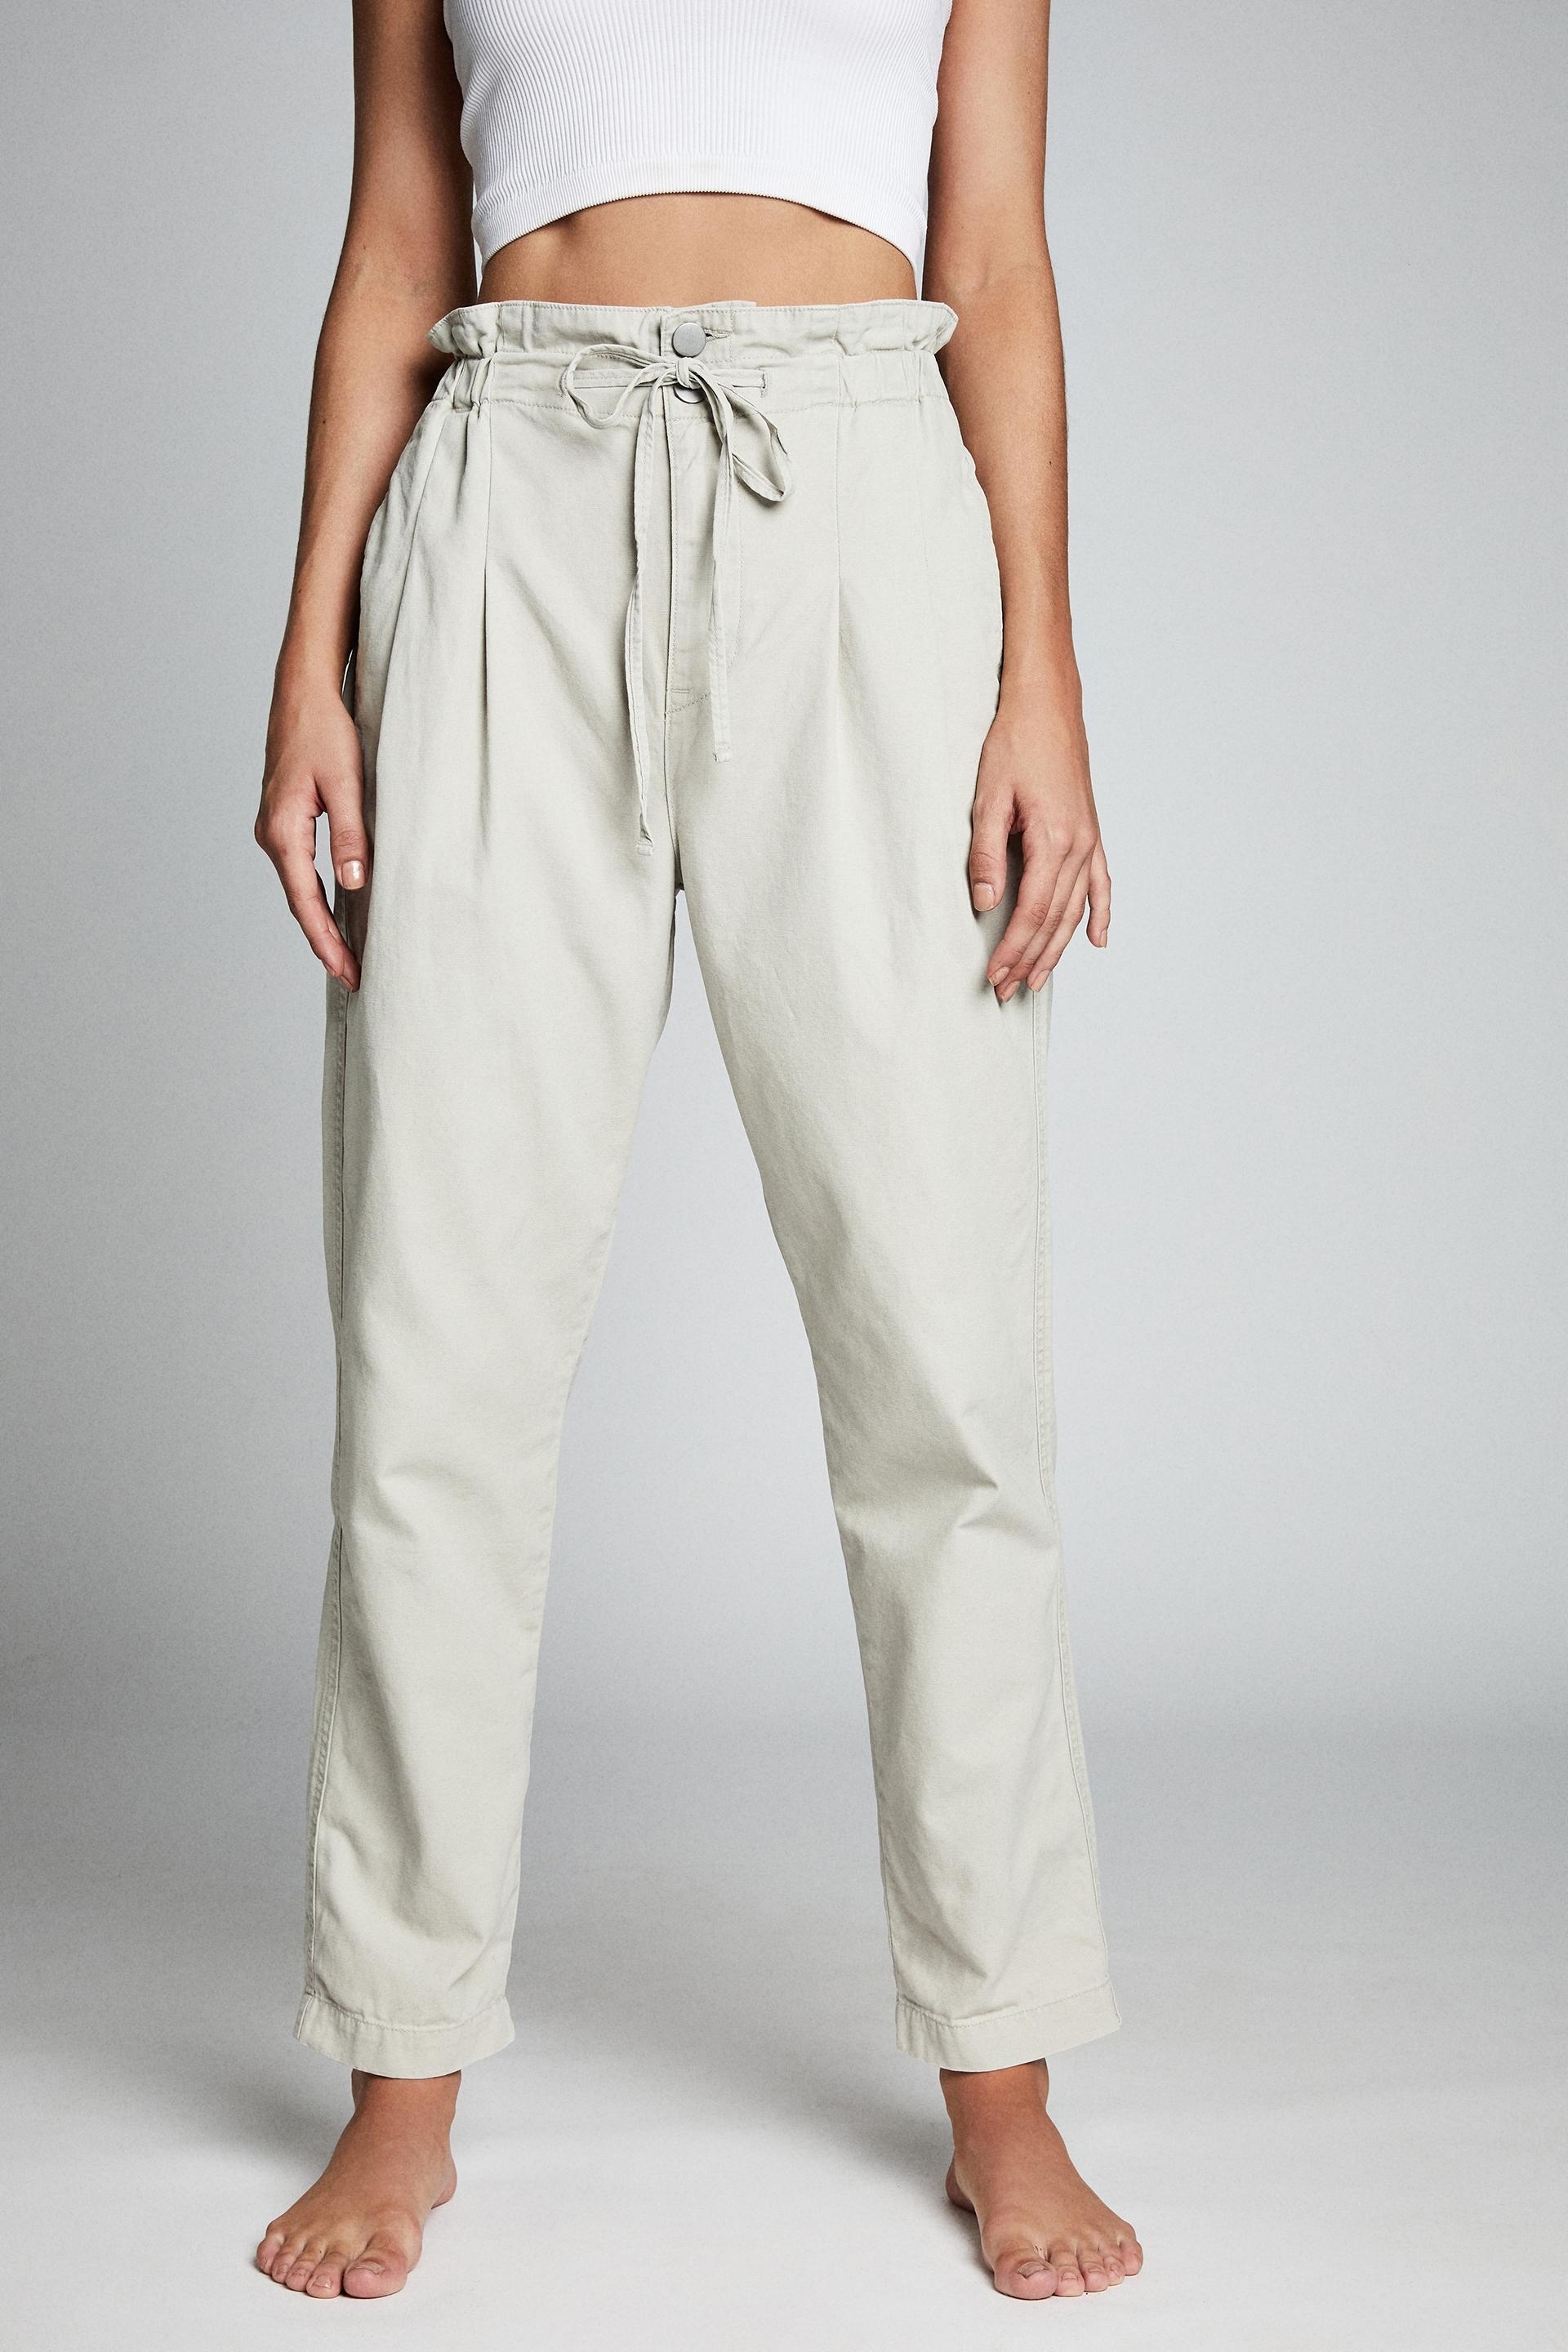 Paperbag pants - grey morn Cotton On Trousers | Superbalist.com